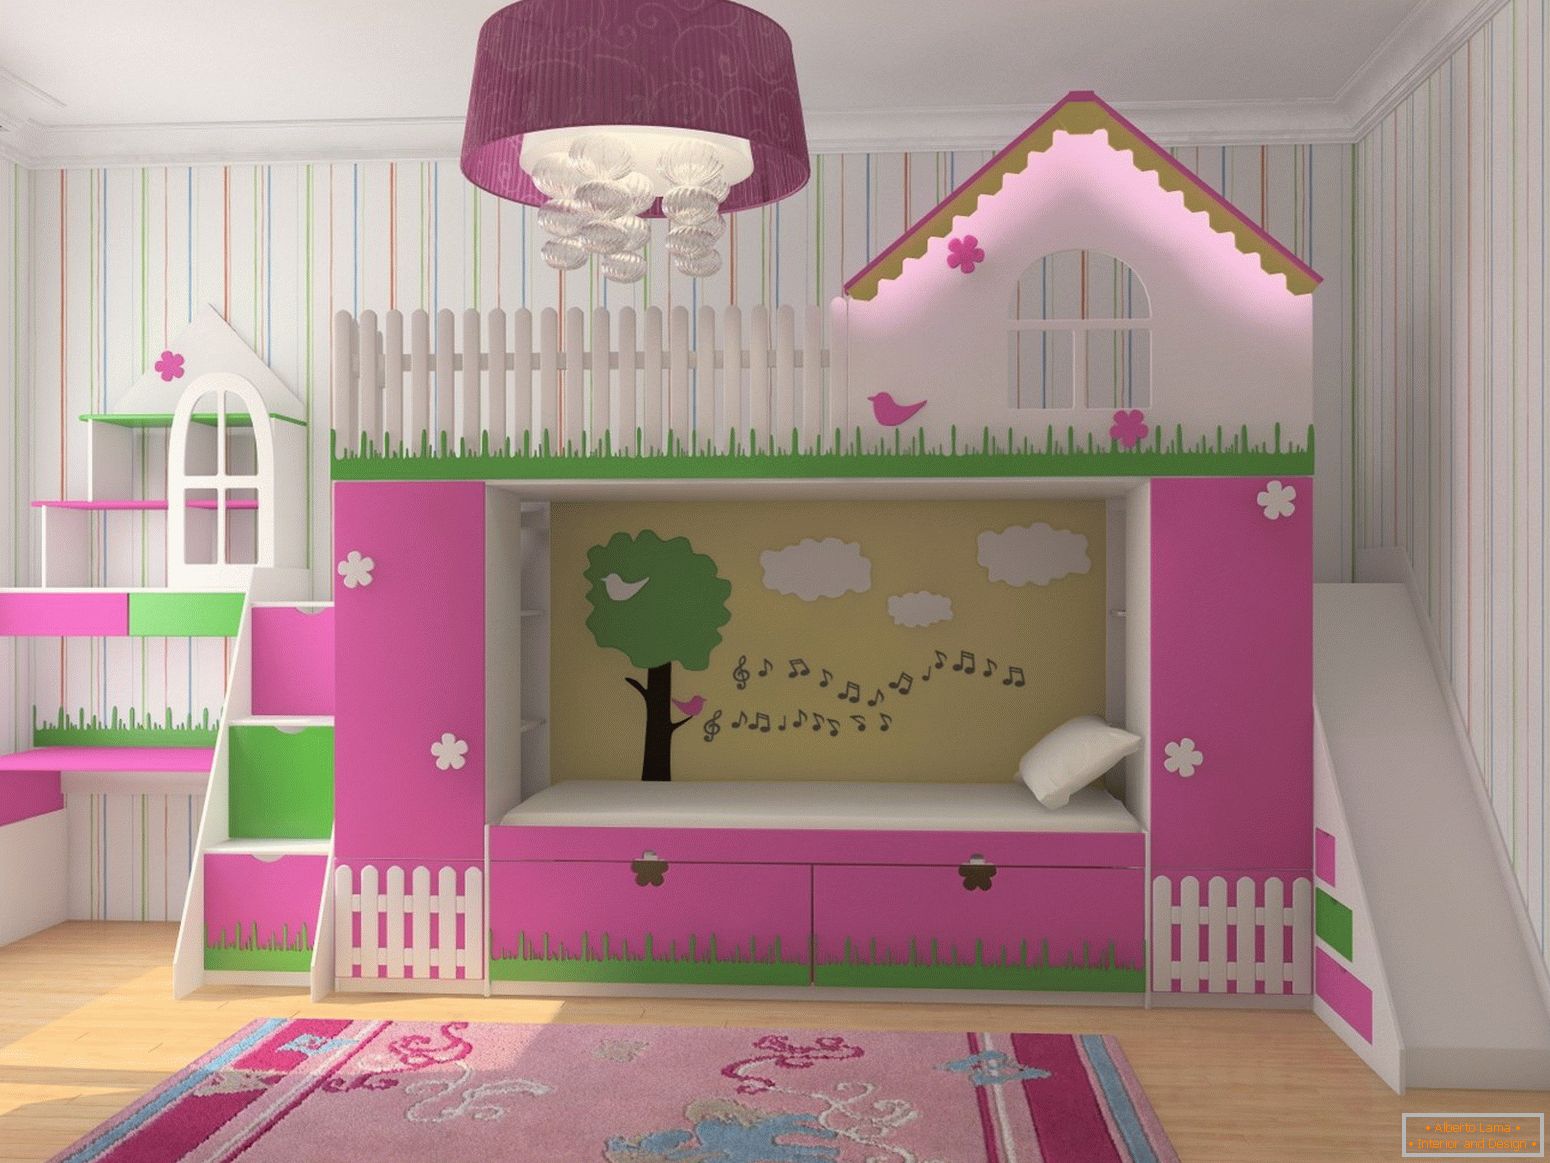 Bunk bed in a romantic style